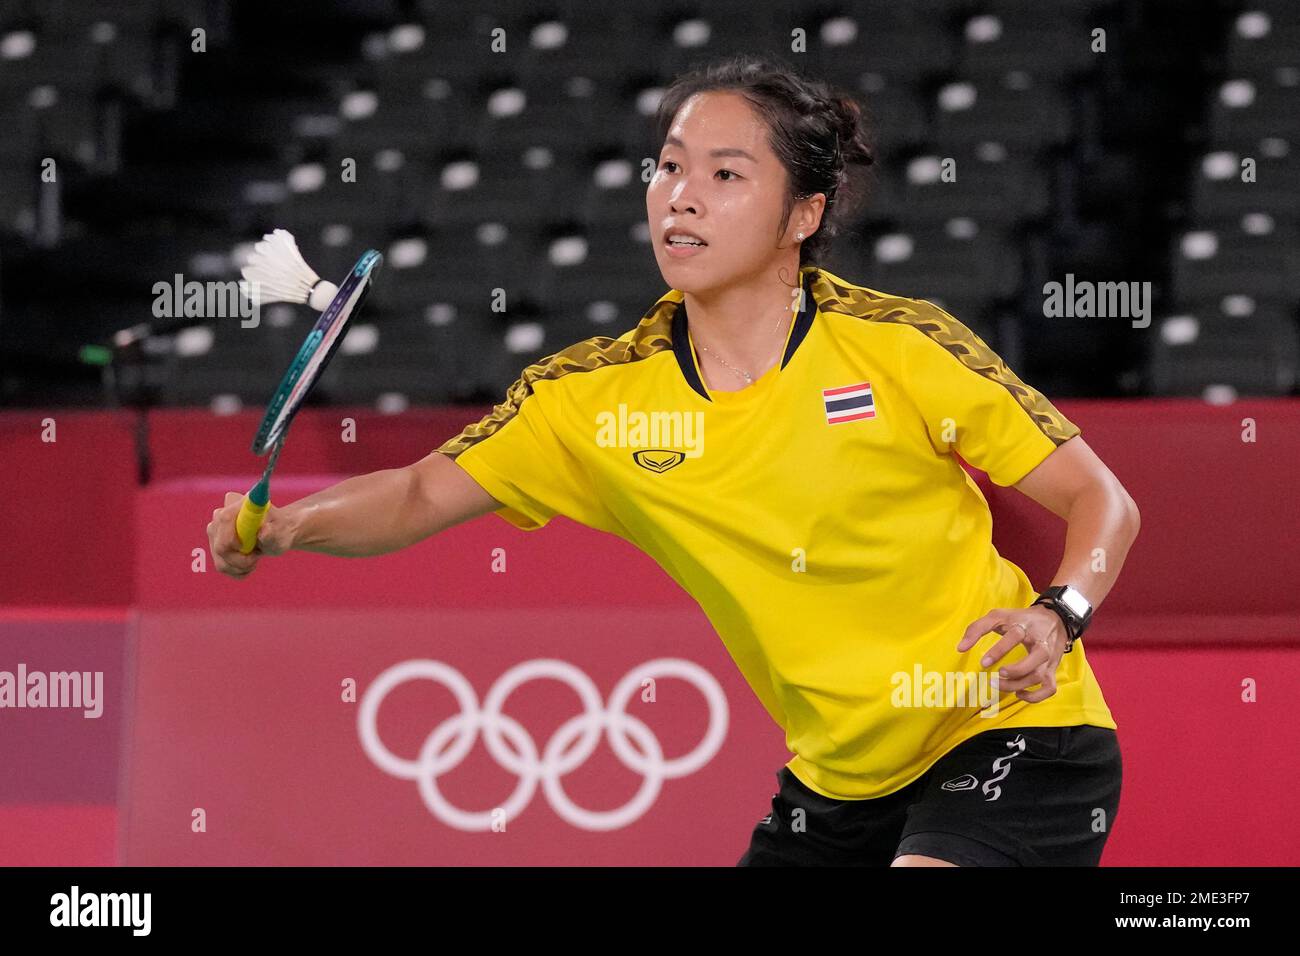 Thailands Ratchanok Intanon plays against Malaysias Cheah Sonila during their womens singles group stage badminton match at the 2020 Summer Olympics, Wednesday, July 28, 2021, in Tokyo, Japan